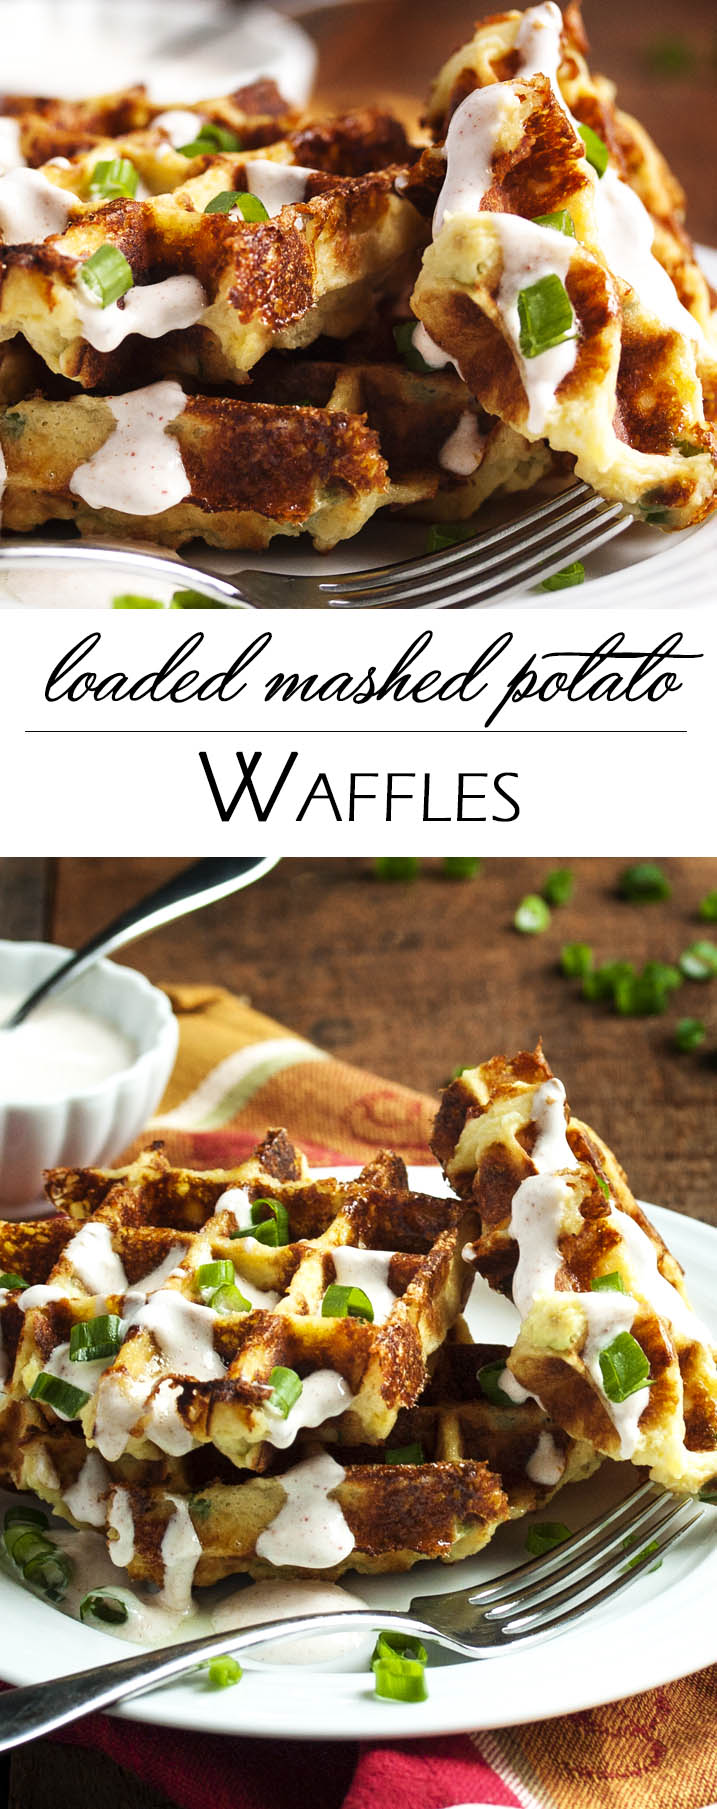 Loaded Mashed Potato Waffles - Mashed Potato Waffles are filled with scallions and cheese and are an awesomely tasty way to enjoy leftover mashed potatoes. Once you try them you may find yourself making mashed potatoes specifically to enjoy these waffles! | justalittlebitofbacon.com